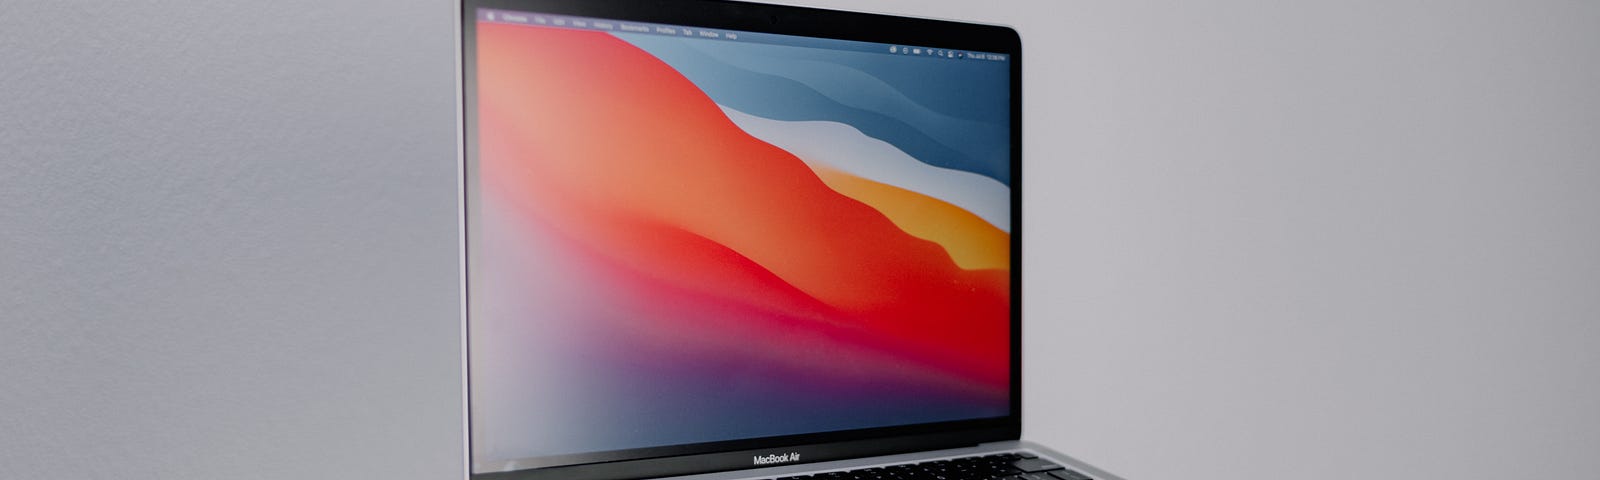 Apple Mac Studio Review. Apple Silicon is delivering on its…, by Mark  Wherry, Mac O'Clock